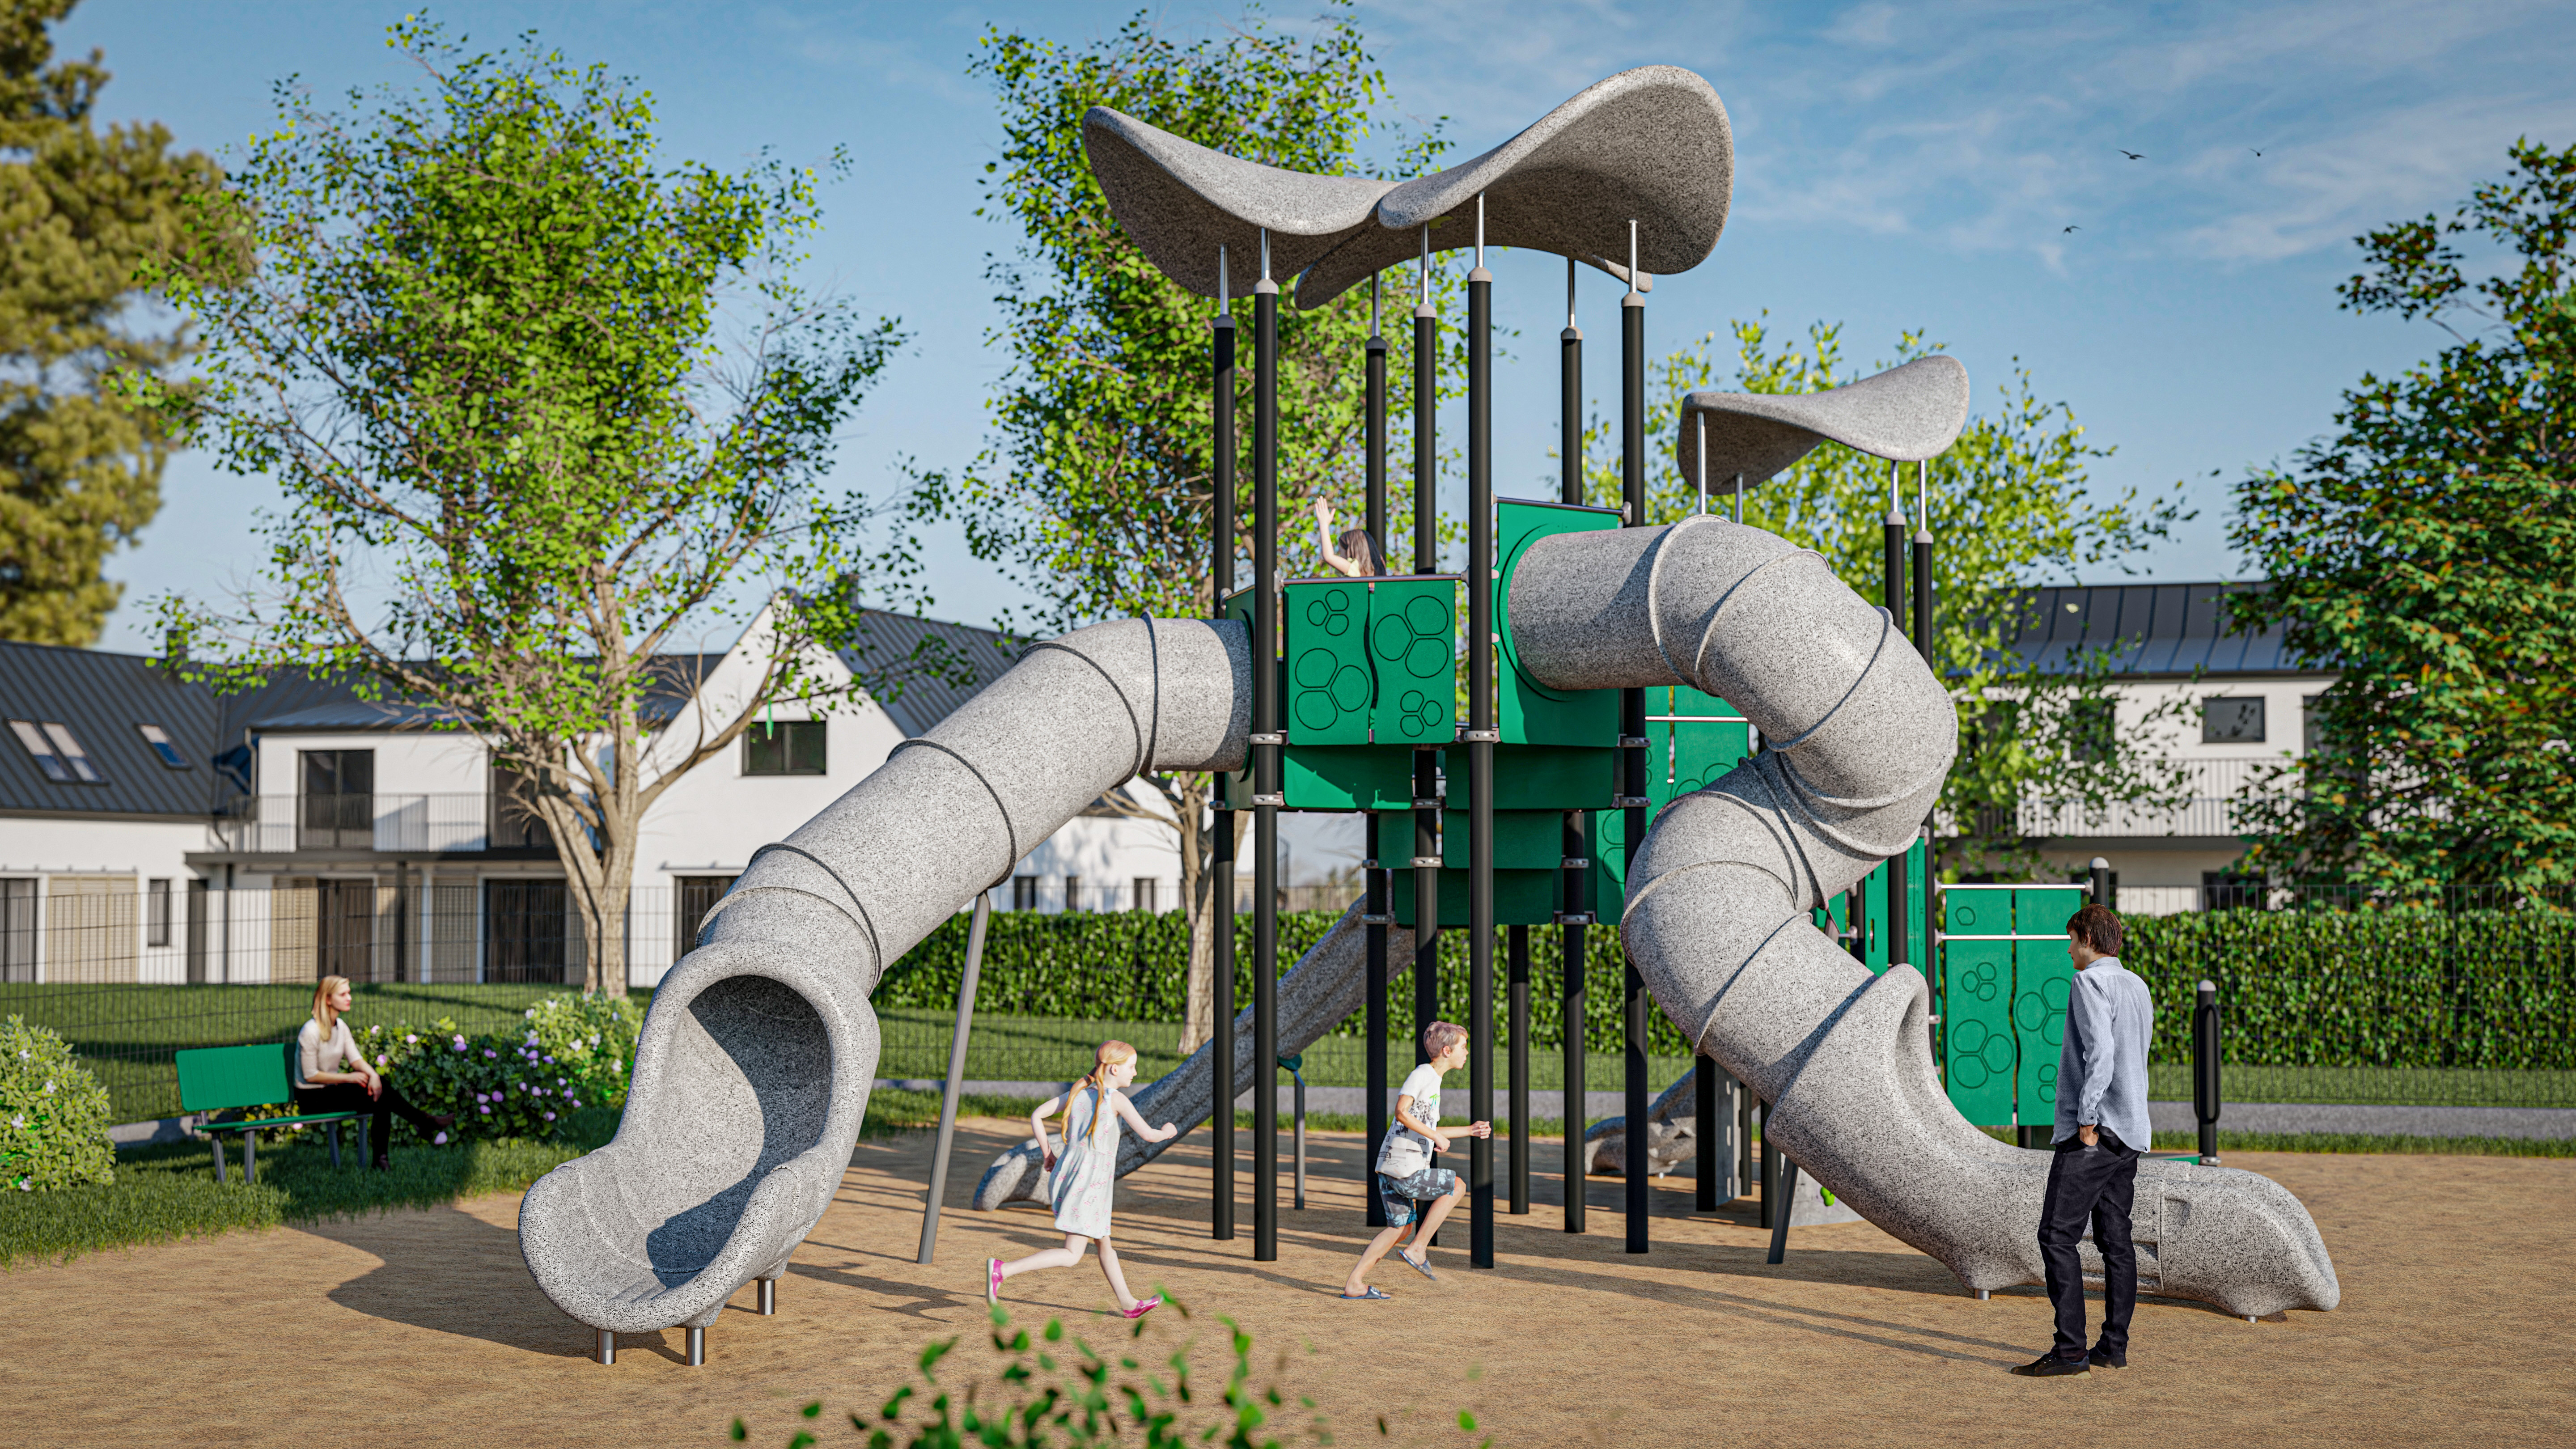 Playgrounds made of recycled materials. Buglo's eco-friendly revolution.